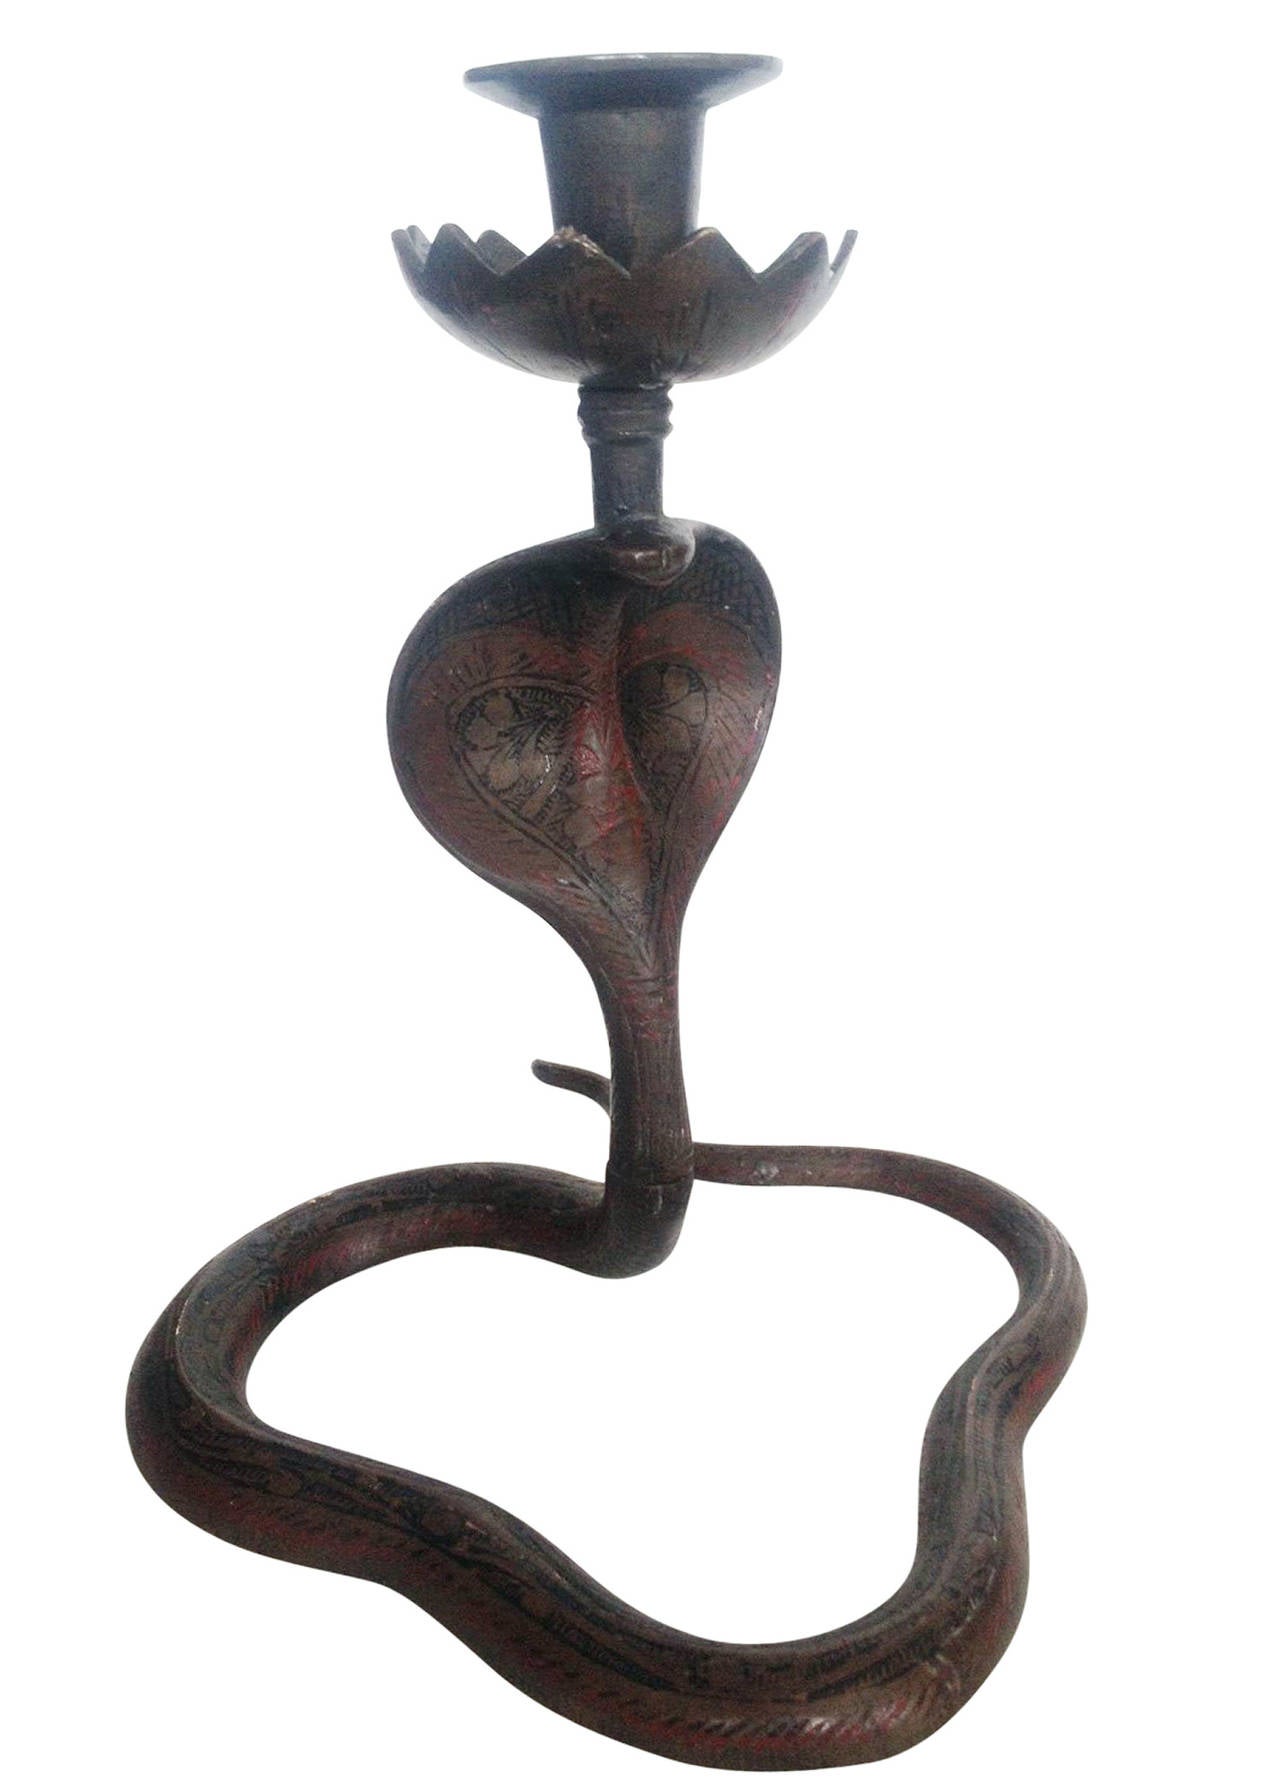 This piece is a pair of bronze cast Indian Cobra Snake candlestick holders. Each cobra is oriented upward and topped with a floral-shaped cup. The bodies are etched with West Asian patterns and decorated with red and black enamel paint.